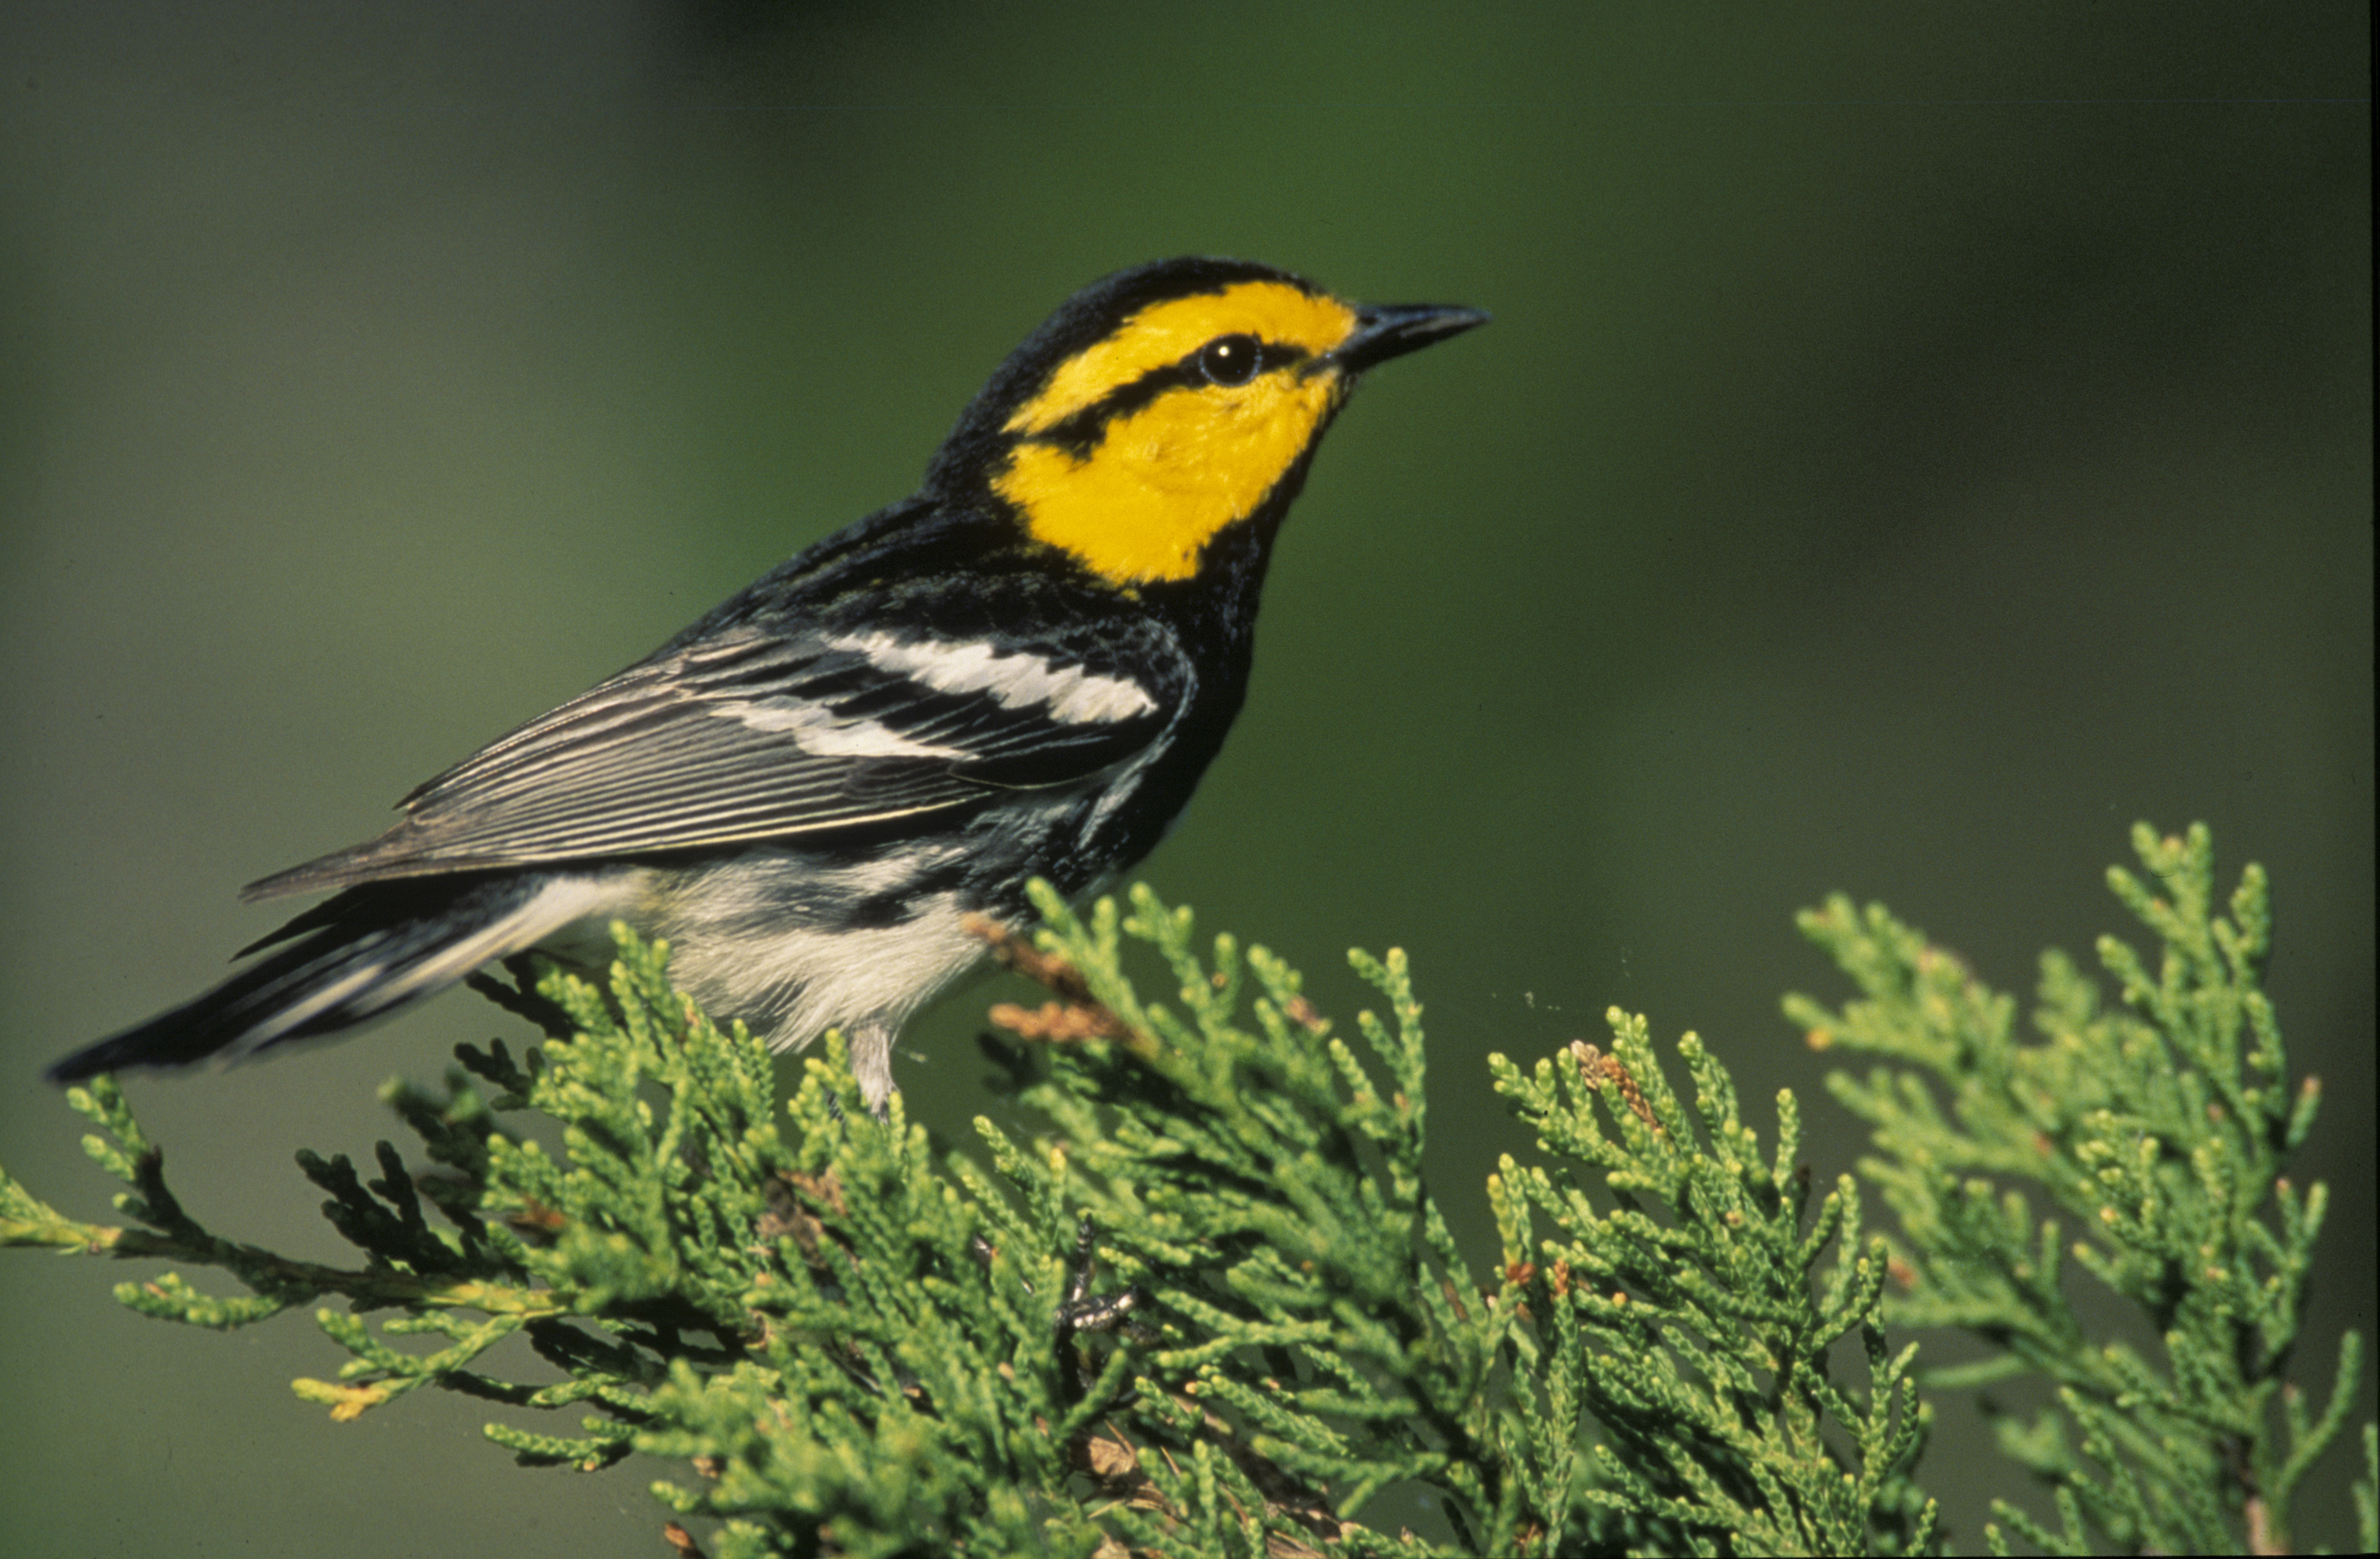 How a Texas songbird and its endangered status became the center of a fight over the Hill Country